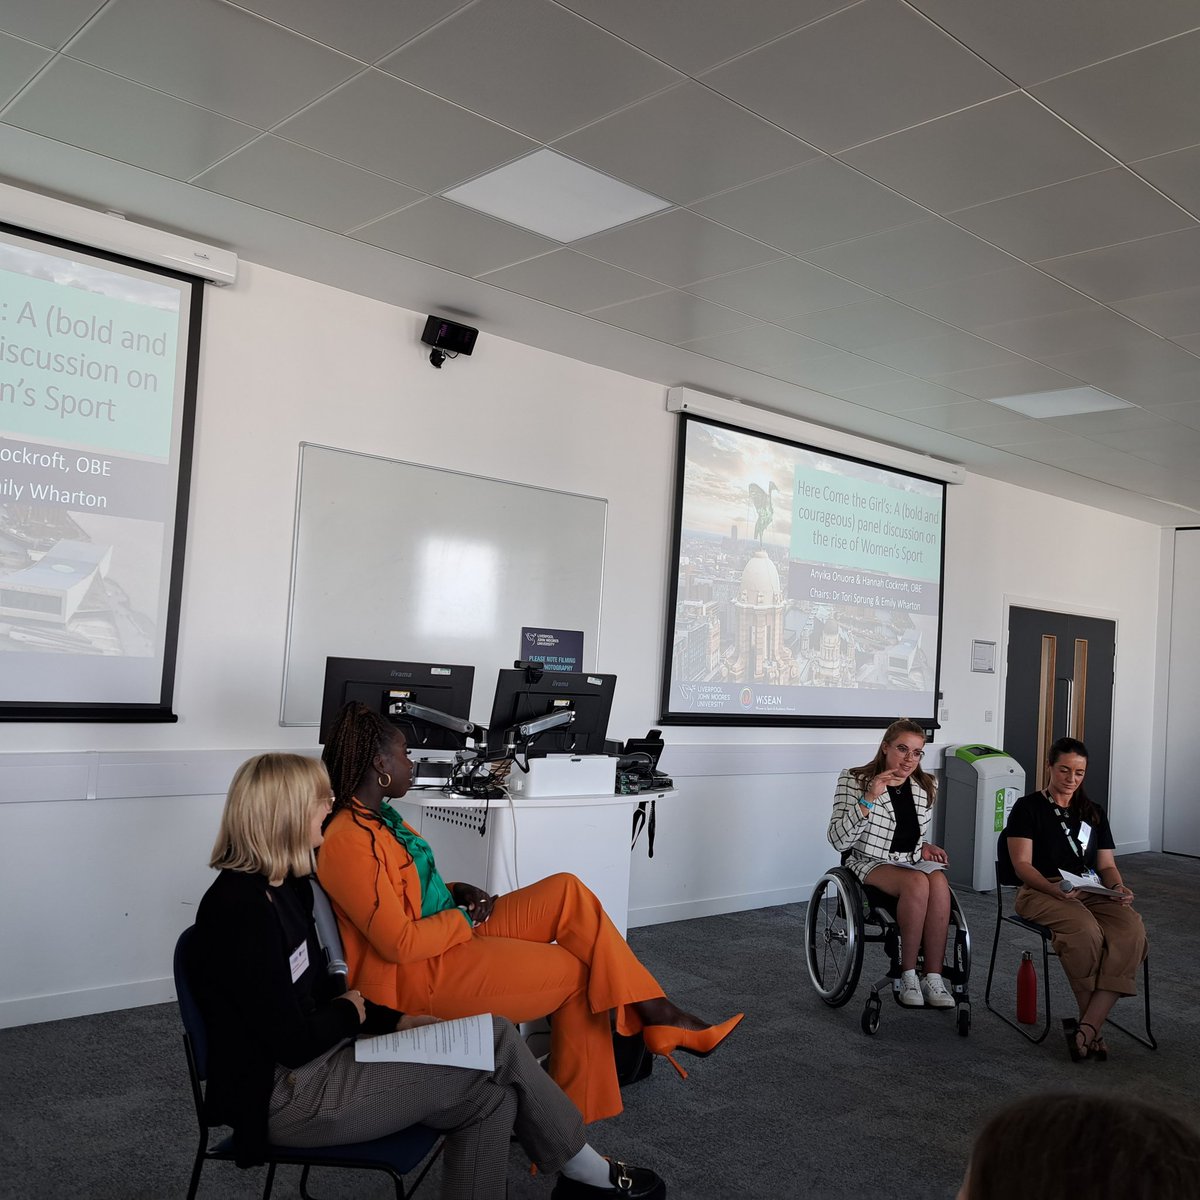 What a way to kick off day two of @wiseconf. So grateful to be able to hear from top athletes @annyonuora and @HanCockroft @WISE_AN #femaleathletes #intersectionality #breakingbarriers #inspirationalwomen